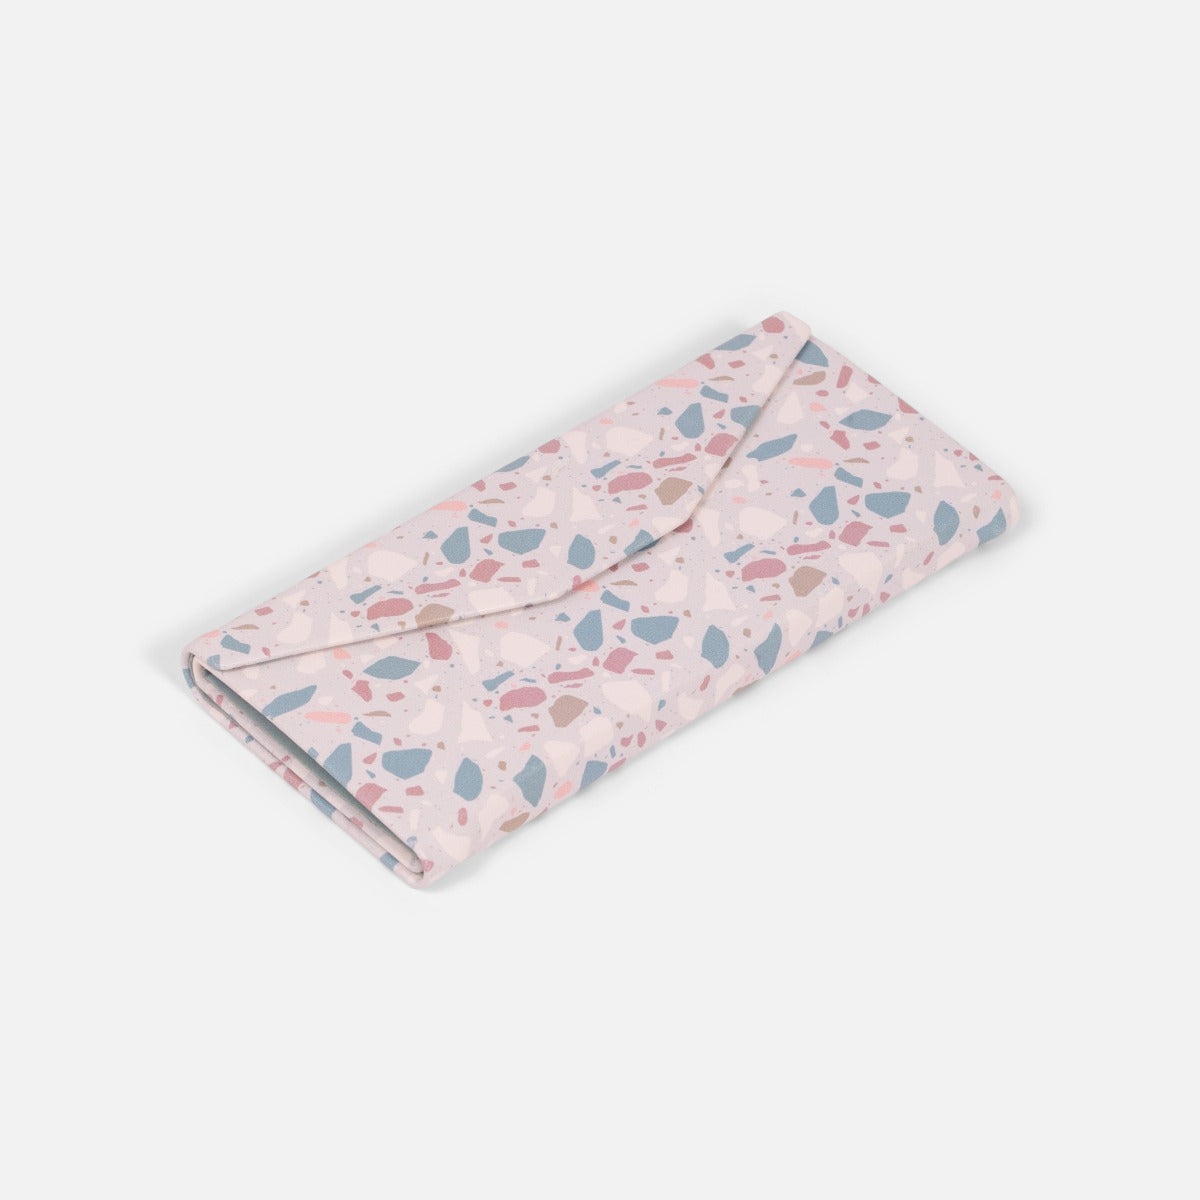 Foldable glasses case with terrazzo pattern   